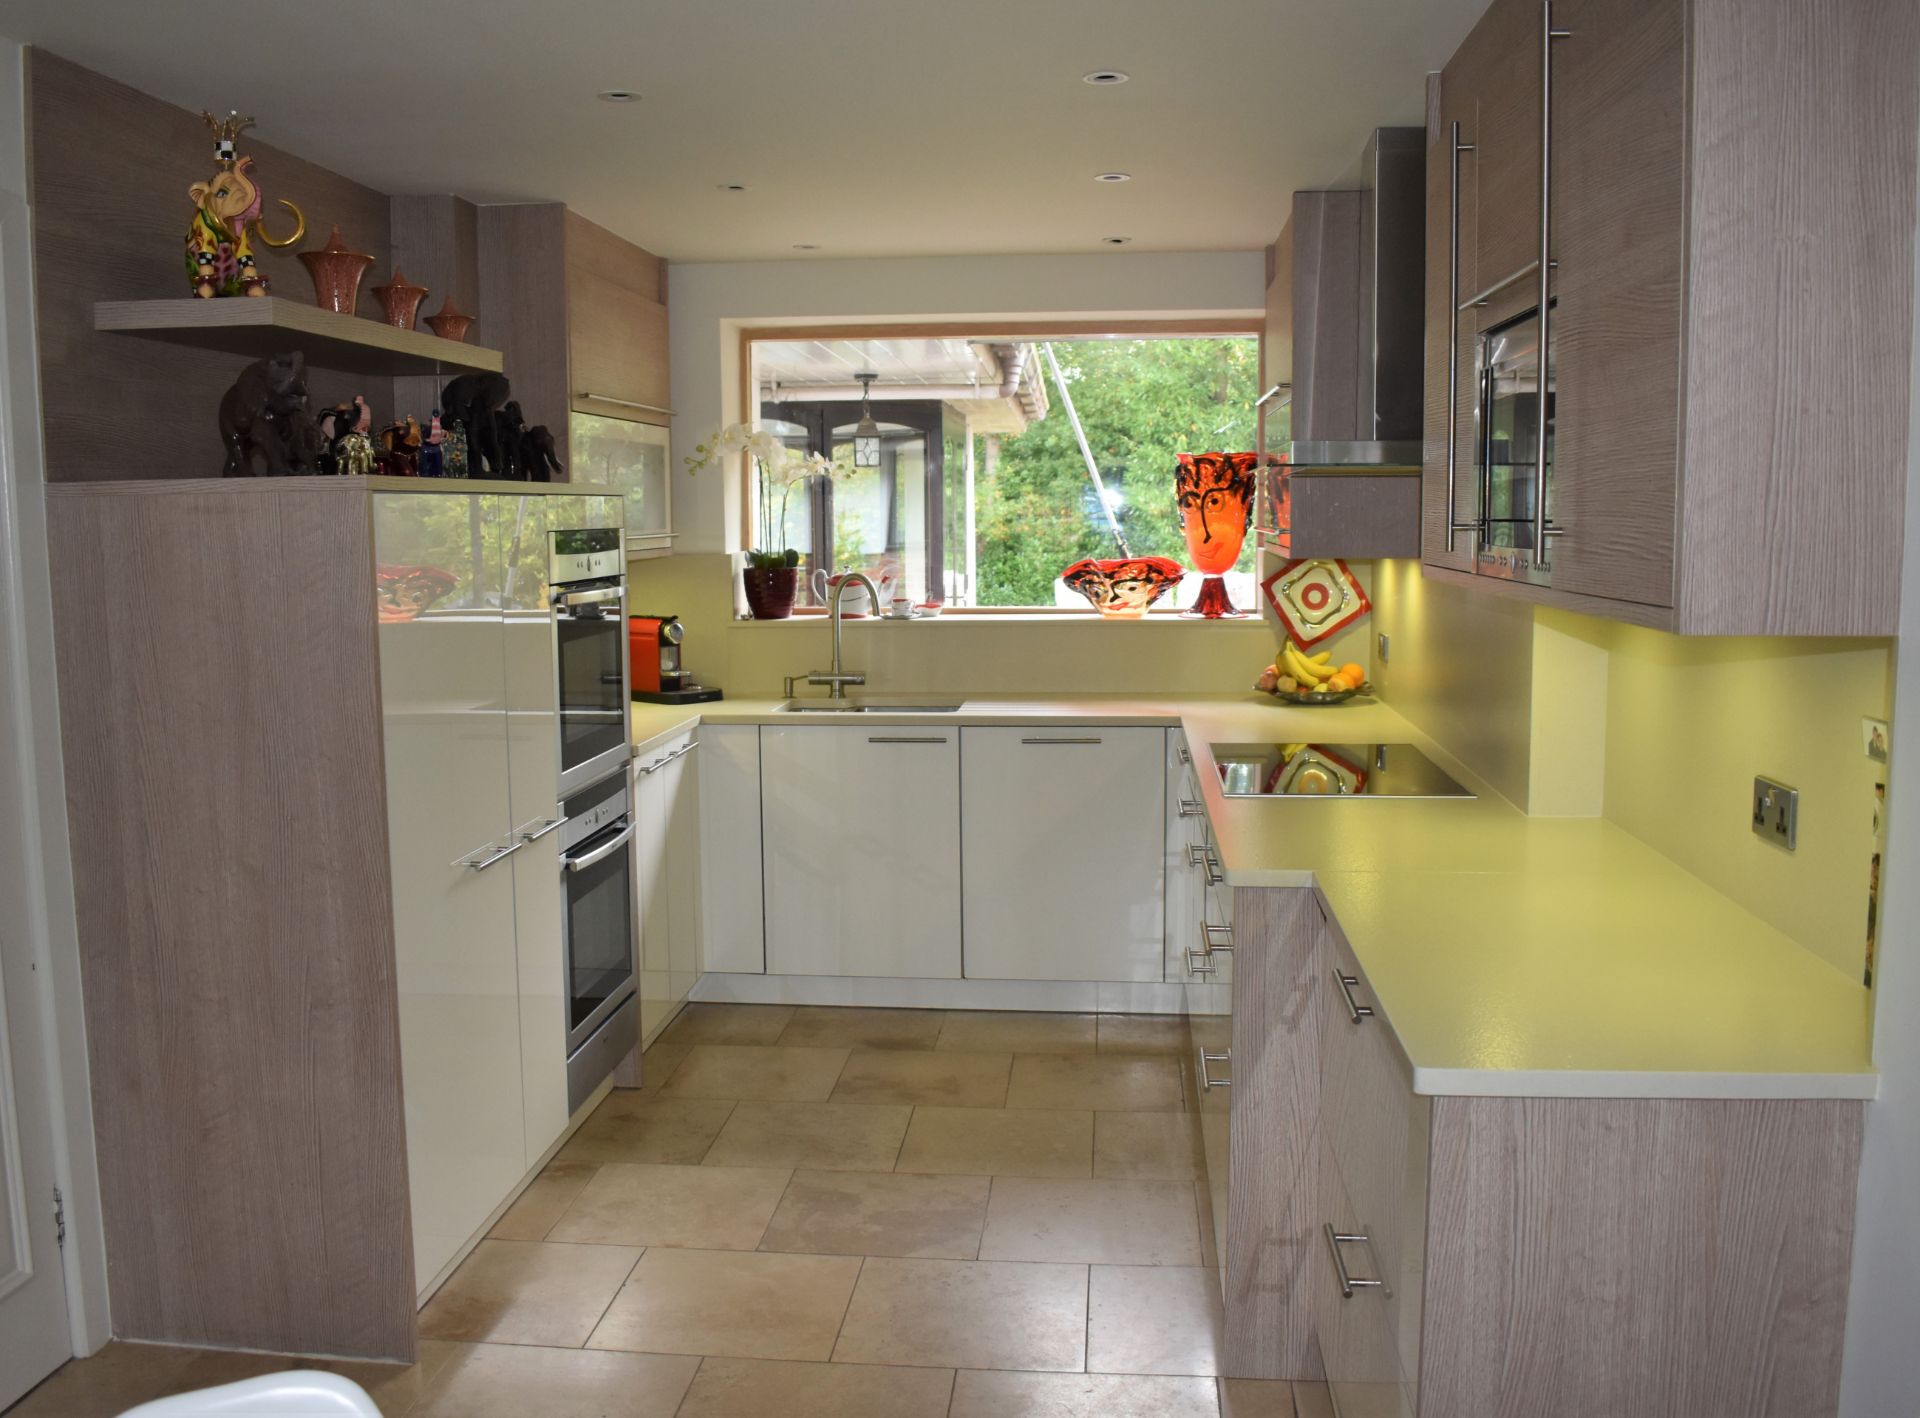 1 x Pronorm Einbauküchen German Made Fitted Kitchen With Contemporary High Gloss Cream Doors and - Image 40 of 51